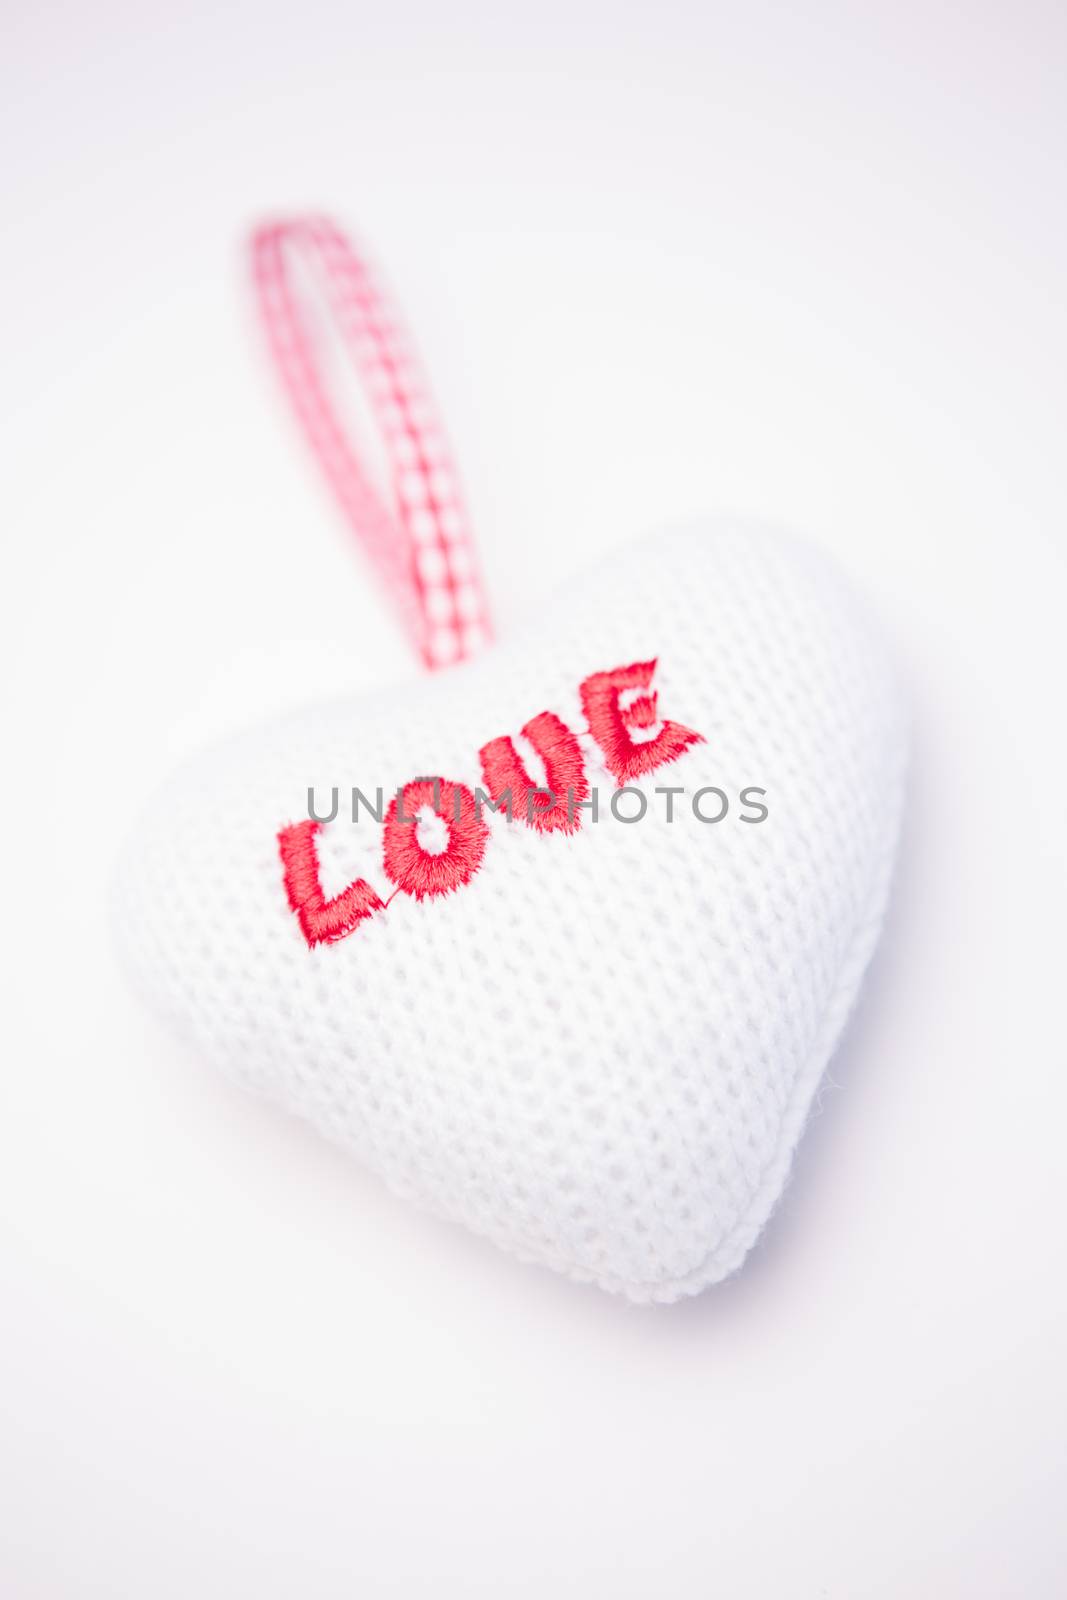 Pink and white love heart decoration by Wavebreakmedia